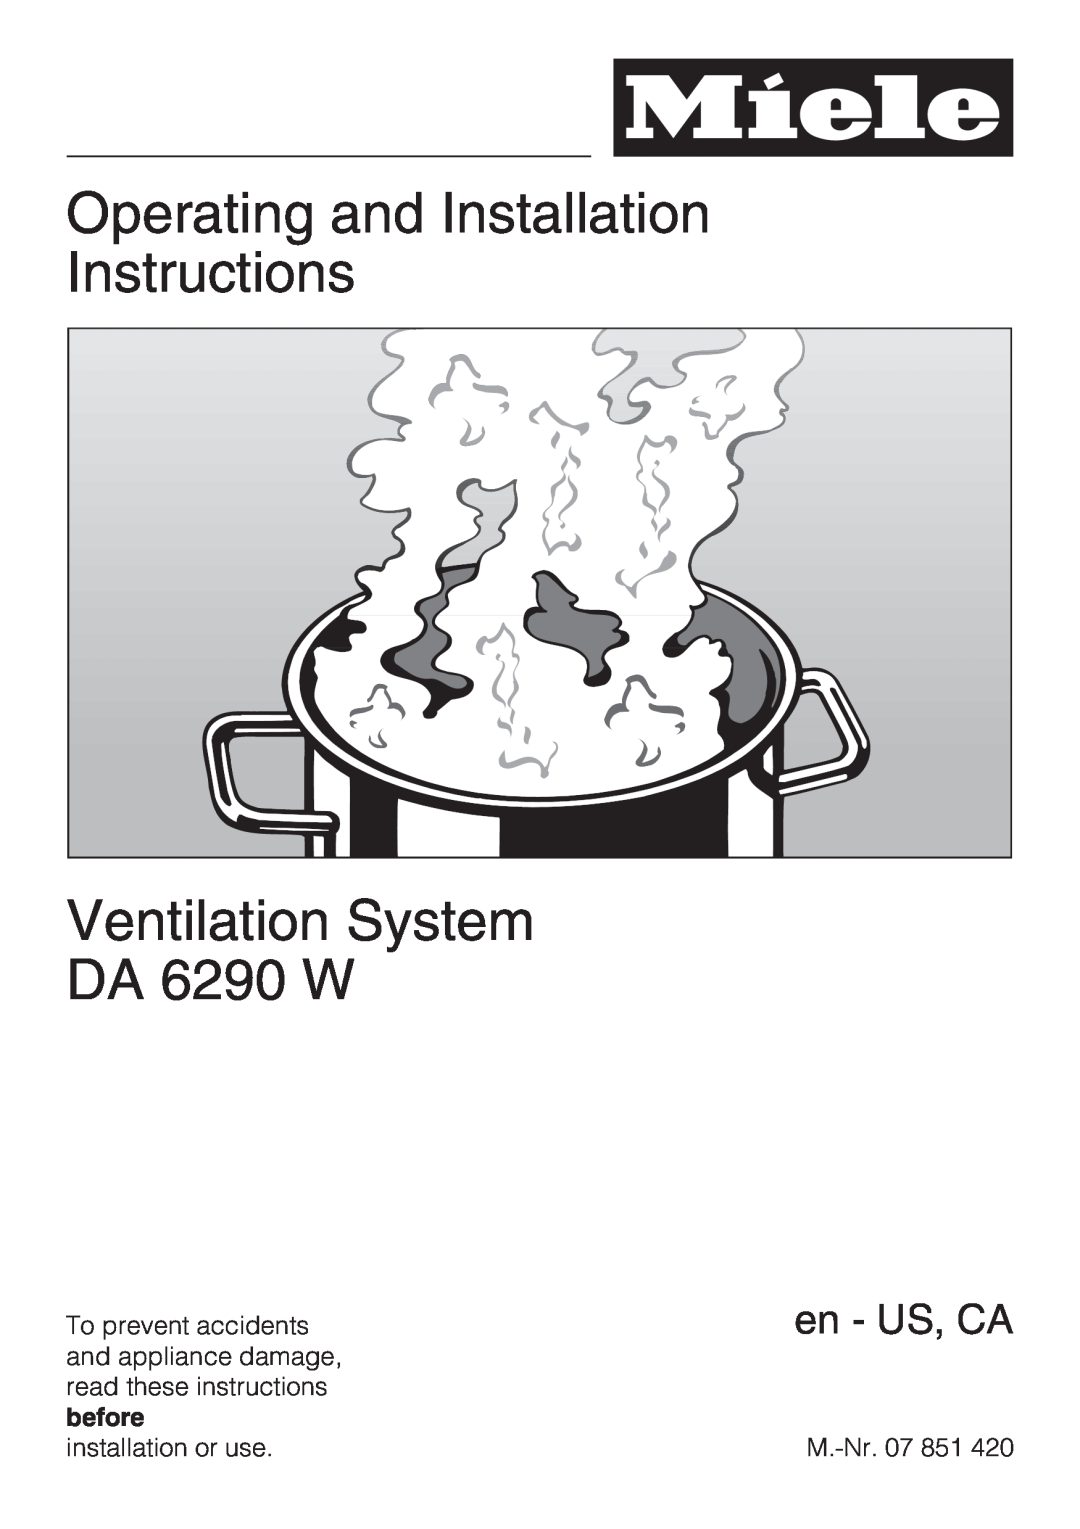 Miele installation instructions Operating and Installation Instructions, Ventilation System DA 6290 W, en - US, CA 